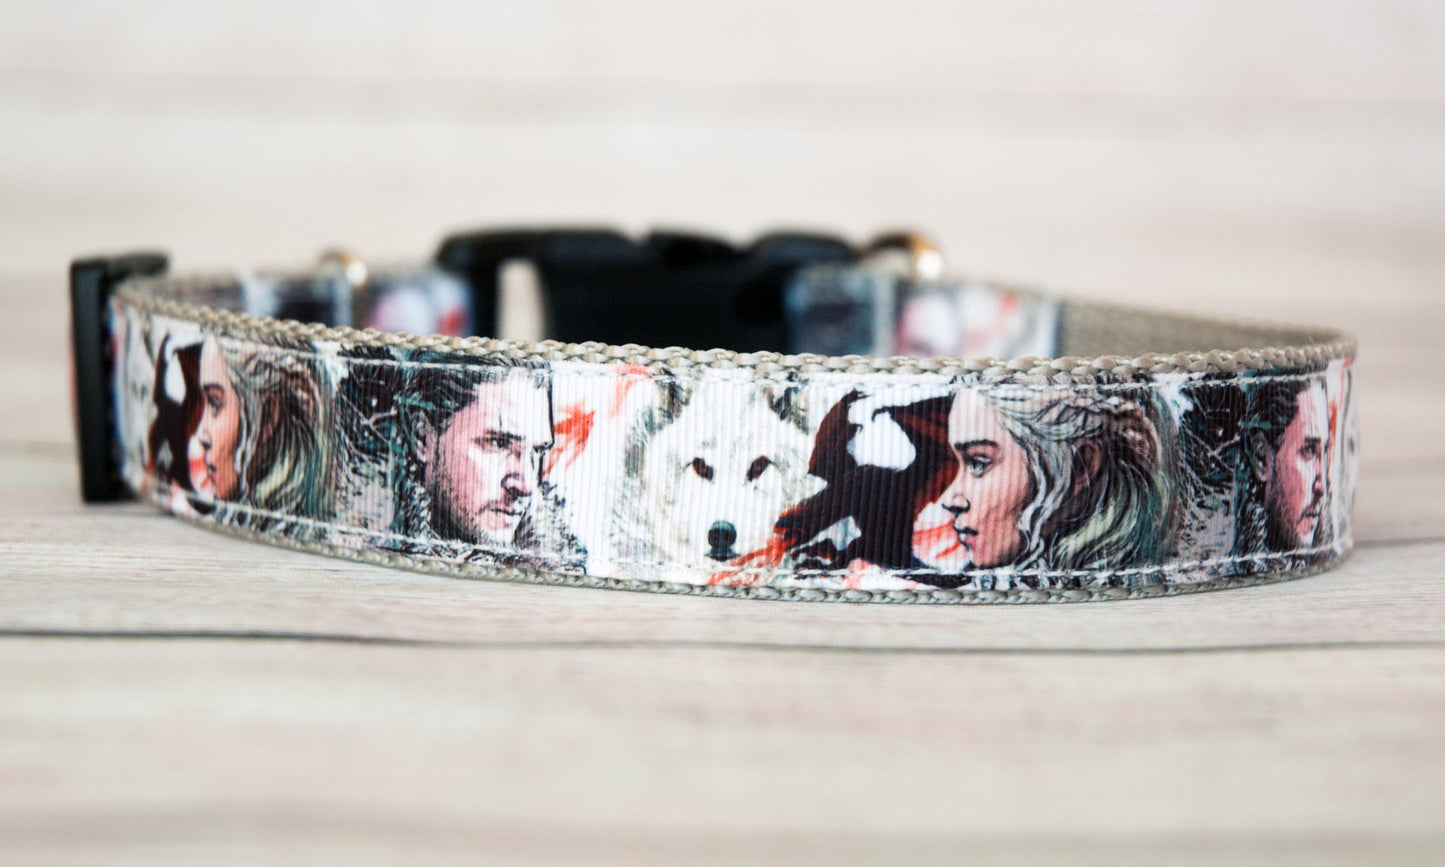 King of the North and Mother of Dragons Dog Collar and/or leash. 1 inch wide